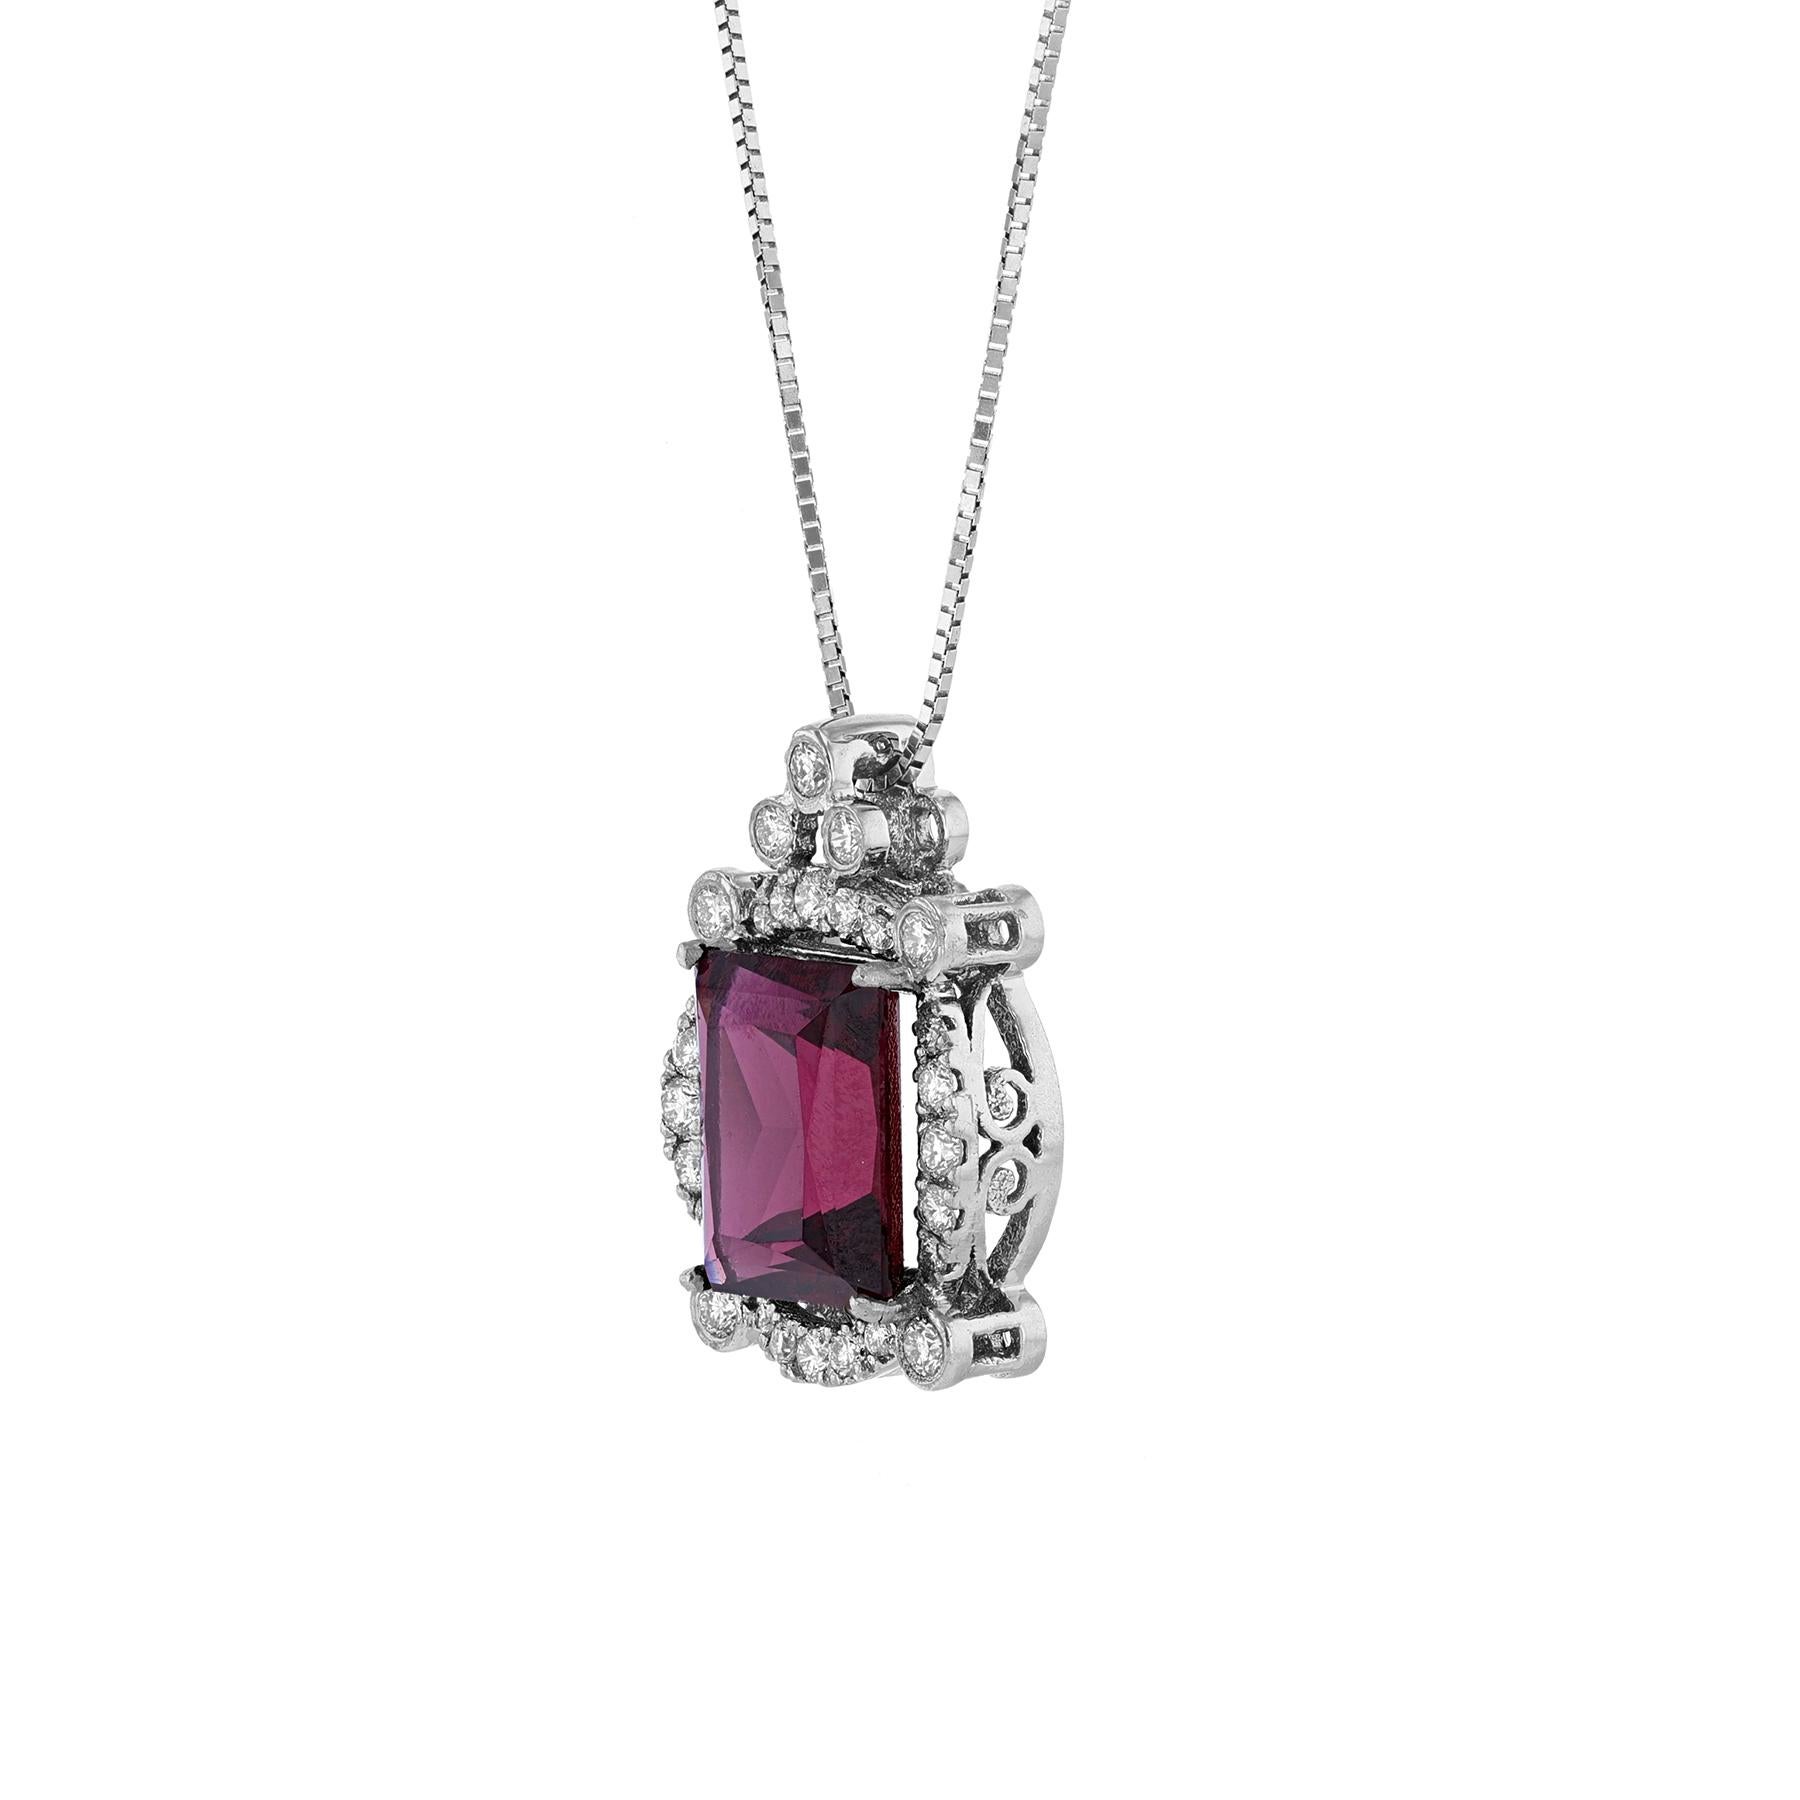 This pendant necklace is made in 14K white gold. It features a emerald cut Garnet weighing 10.76 carat. Surrounded by 27 round cut diamonds weighing 0.87 carat. All stones are prong set. The necklace has a color grade (H) and clarity grade (SI2). 